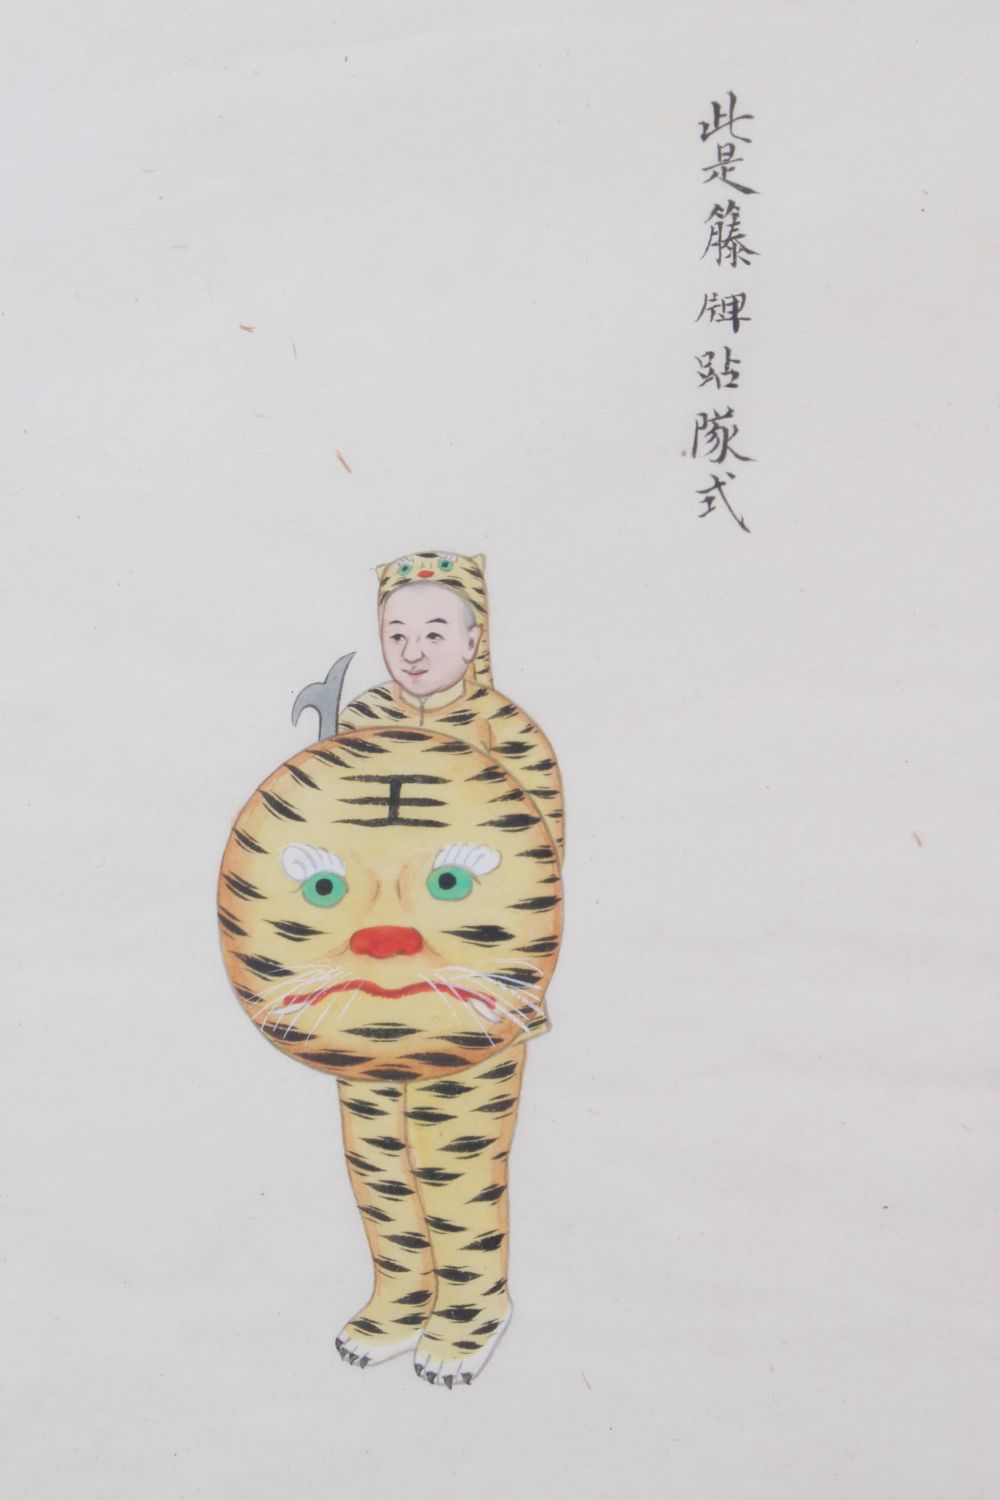 TWO 19TH CENTURY CHINESE PAINTINGS ON PAPER - HORSES & ACTORS, the pictures depicting a figure on - Image 4 of 9